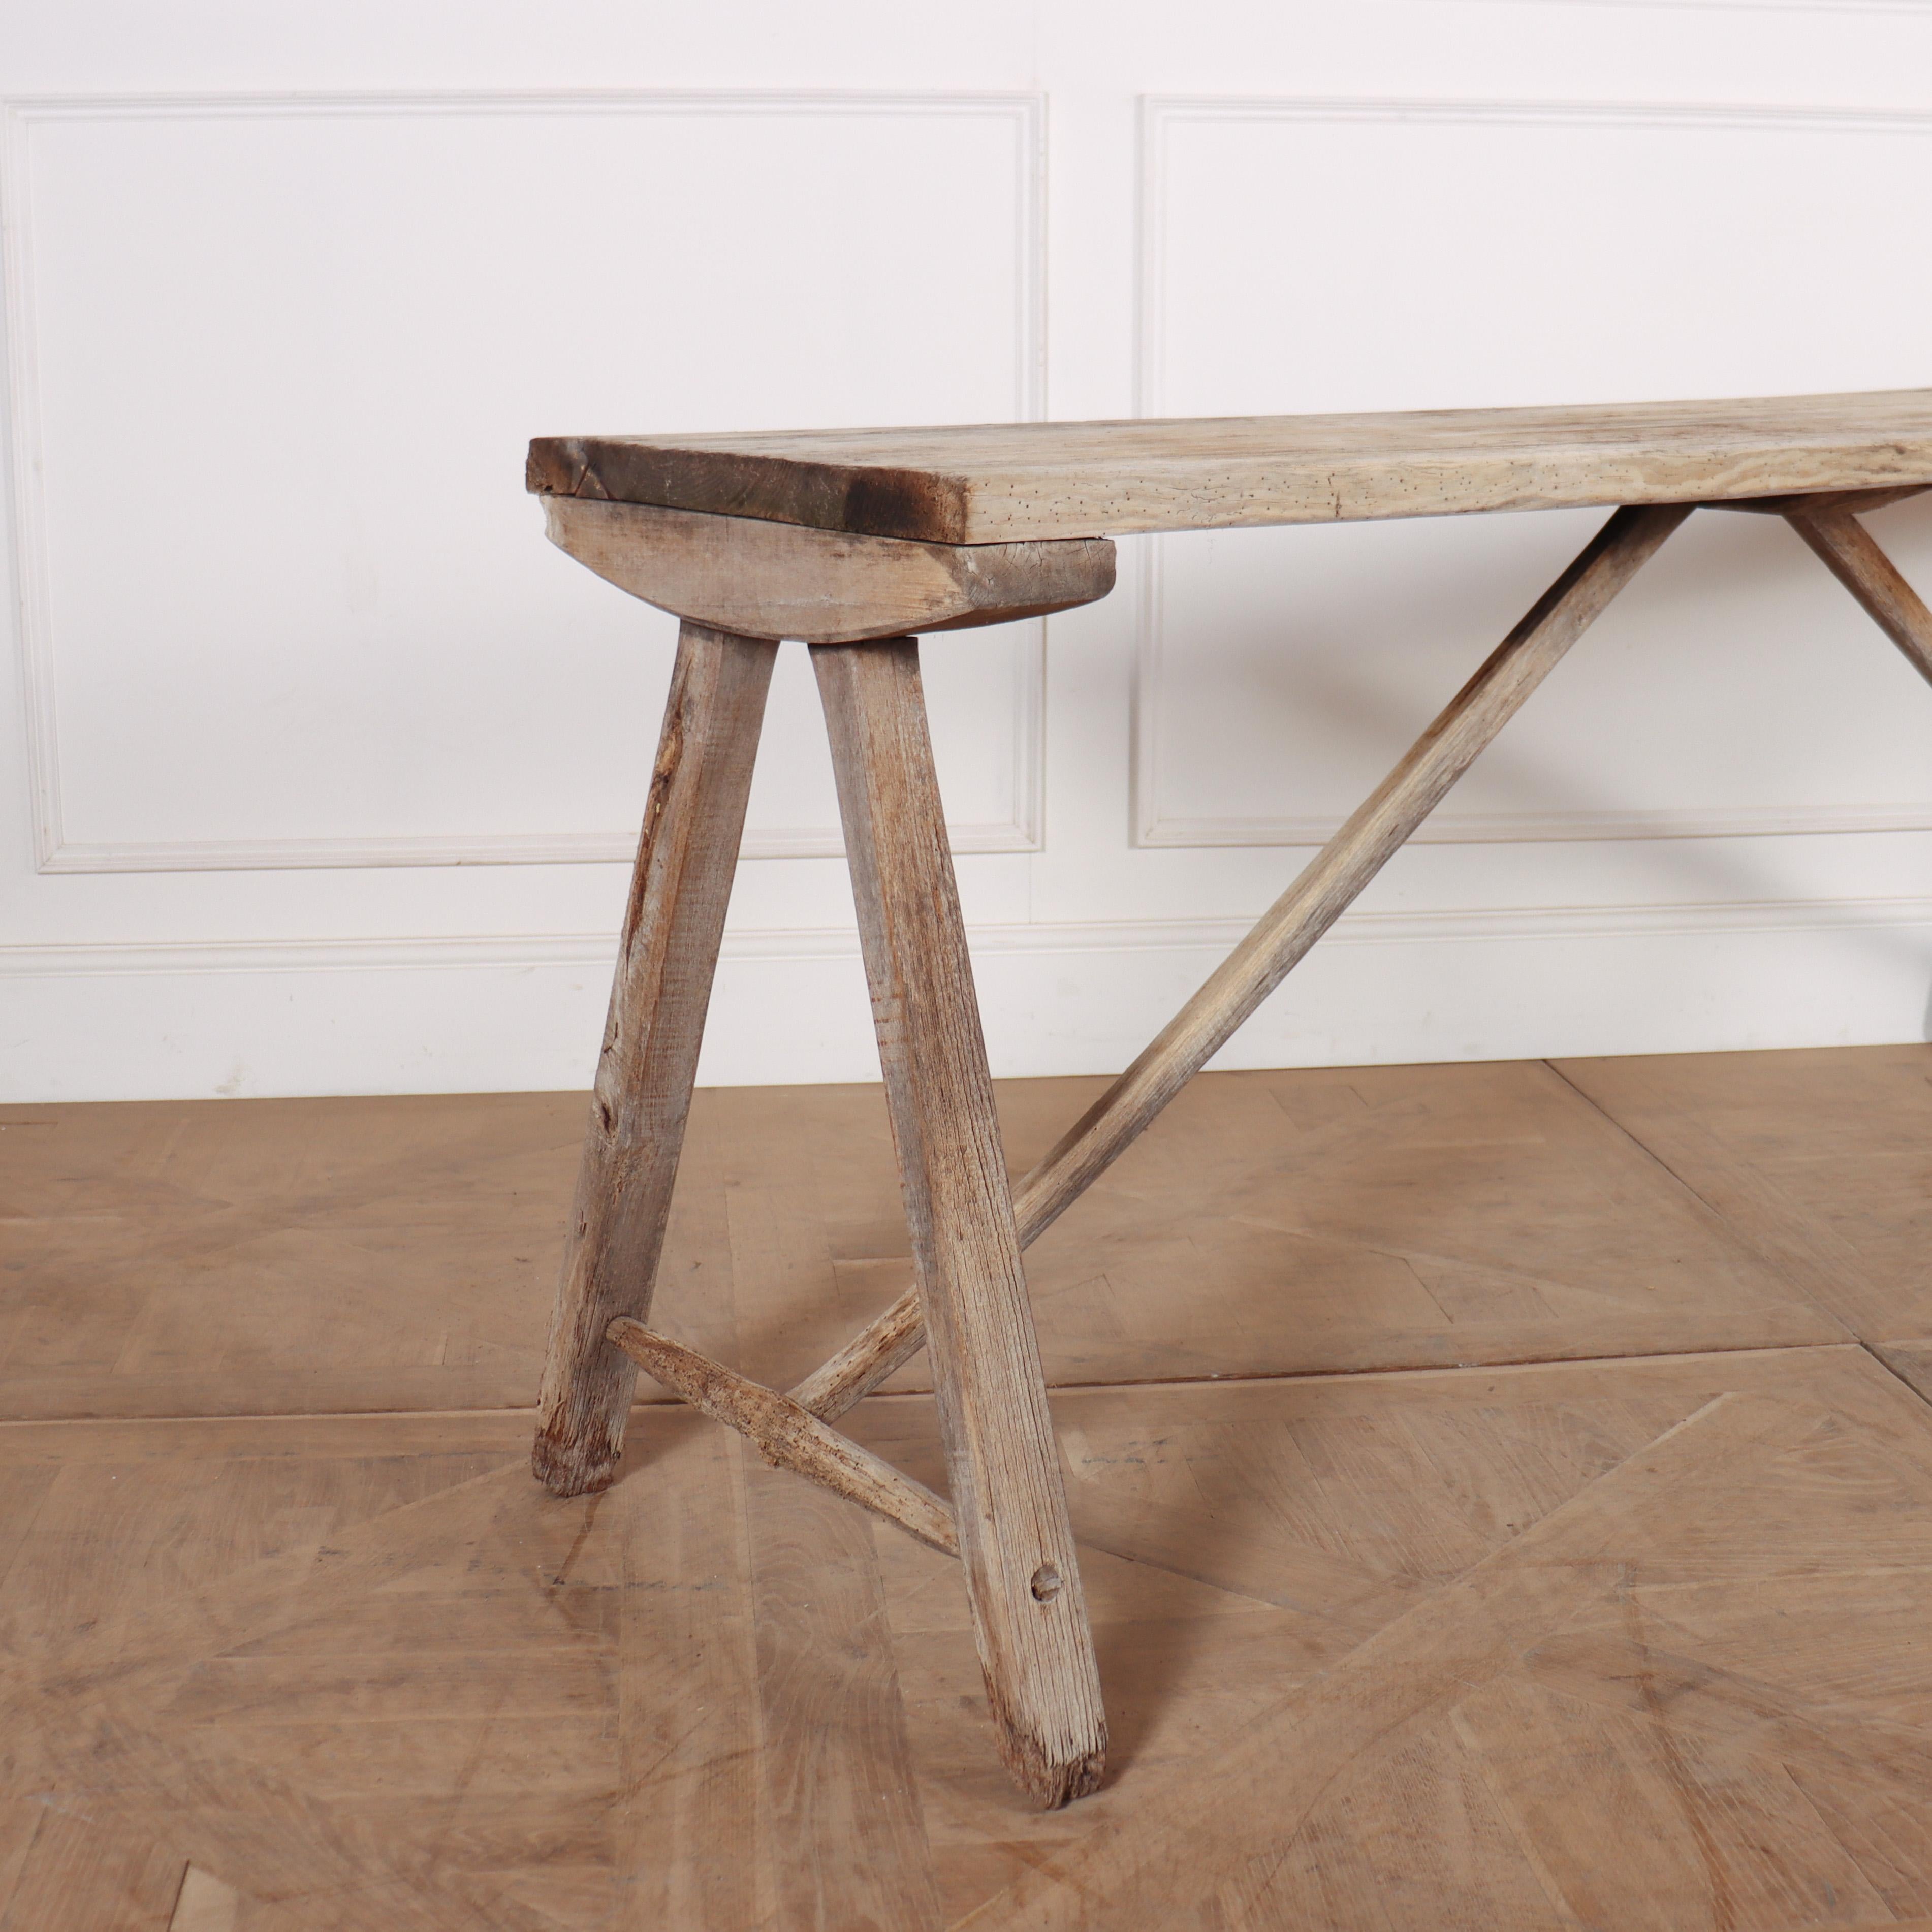 19th C French bleached and scrubbed oak and poplar trestle table. 1880.

Ref: A

Top depth is 18